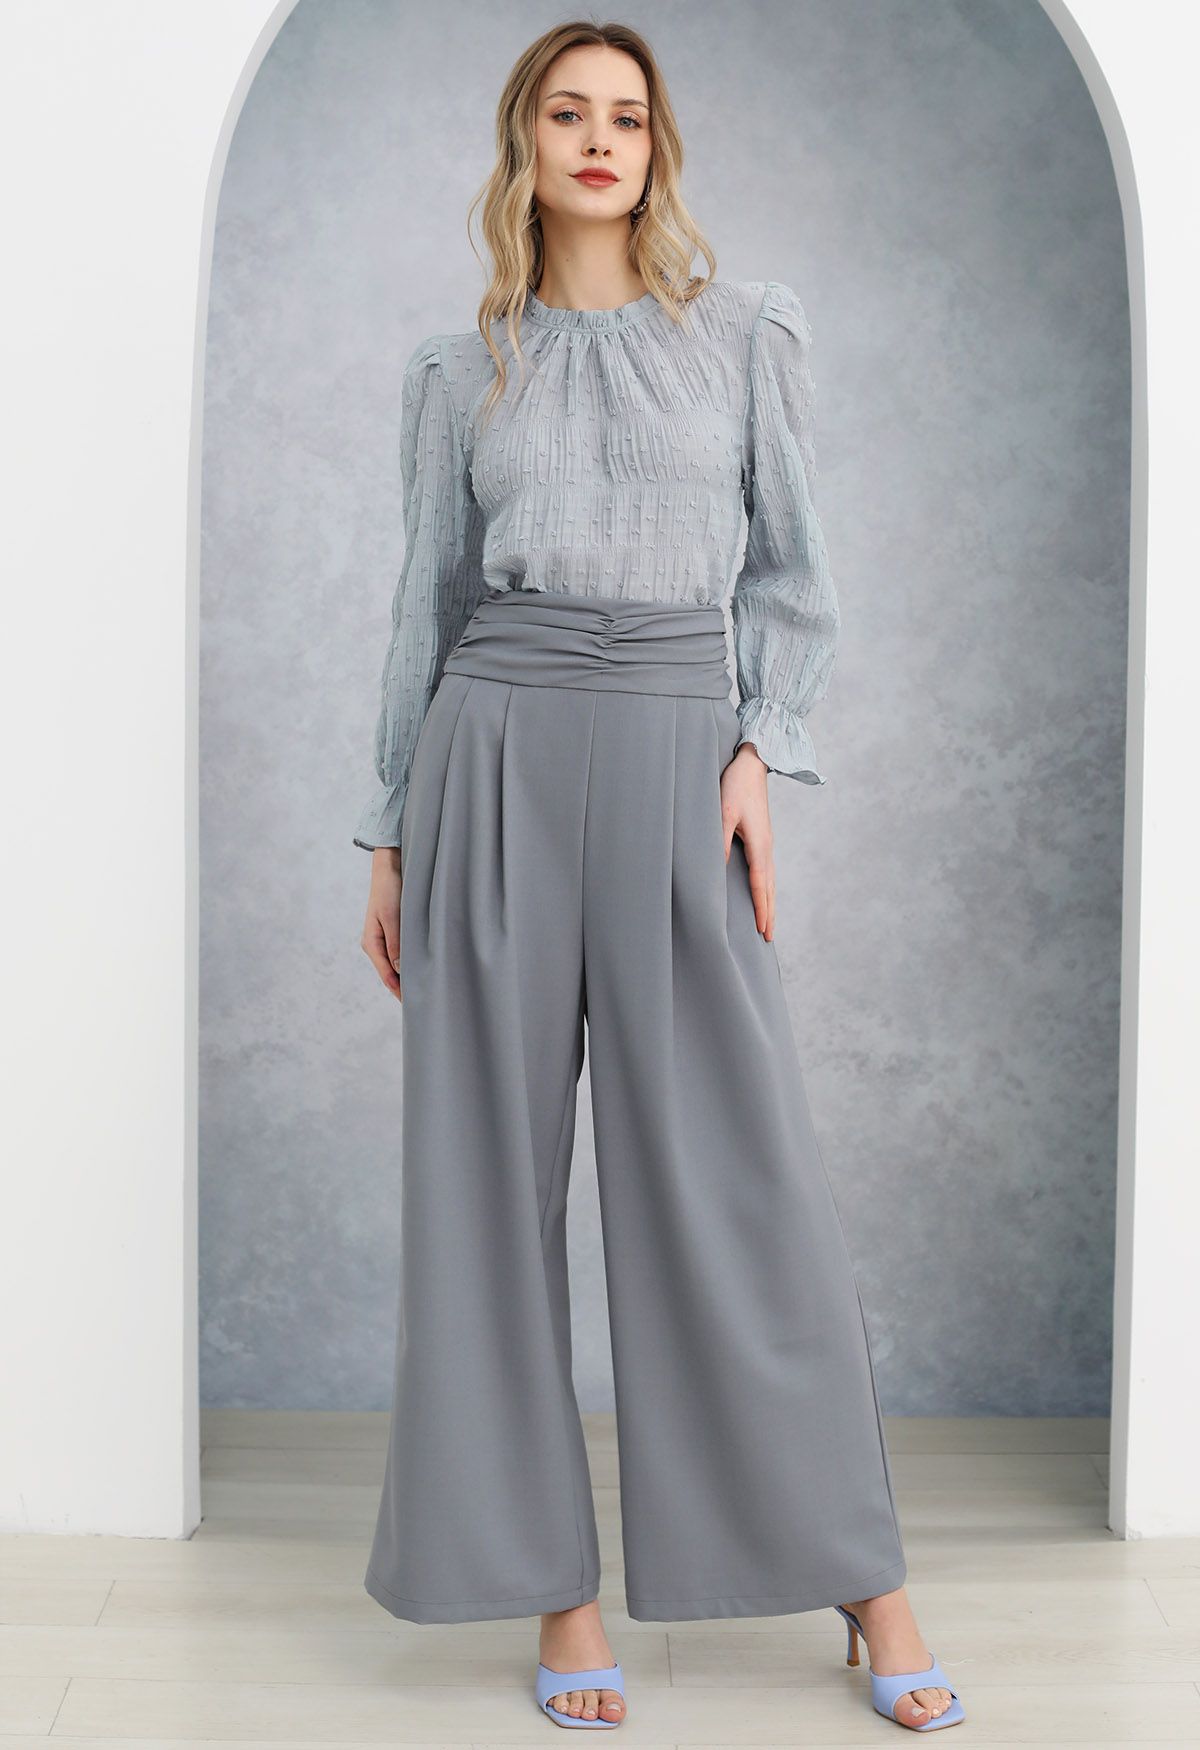 Ruched High Waist Pleated Wide-Leg Pants in Dusty Blue